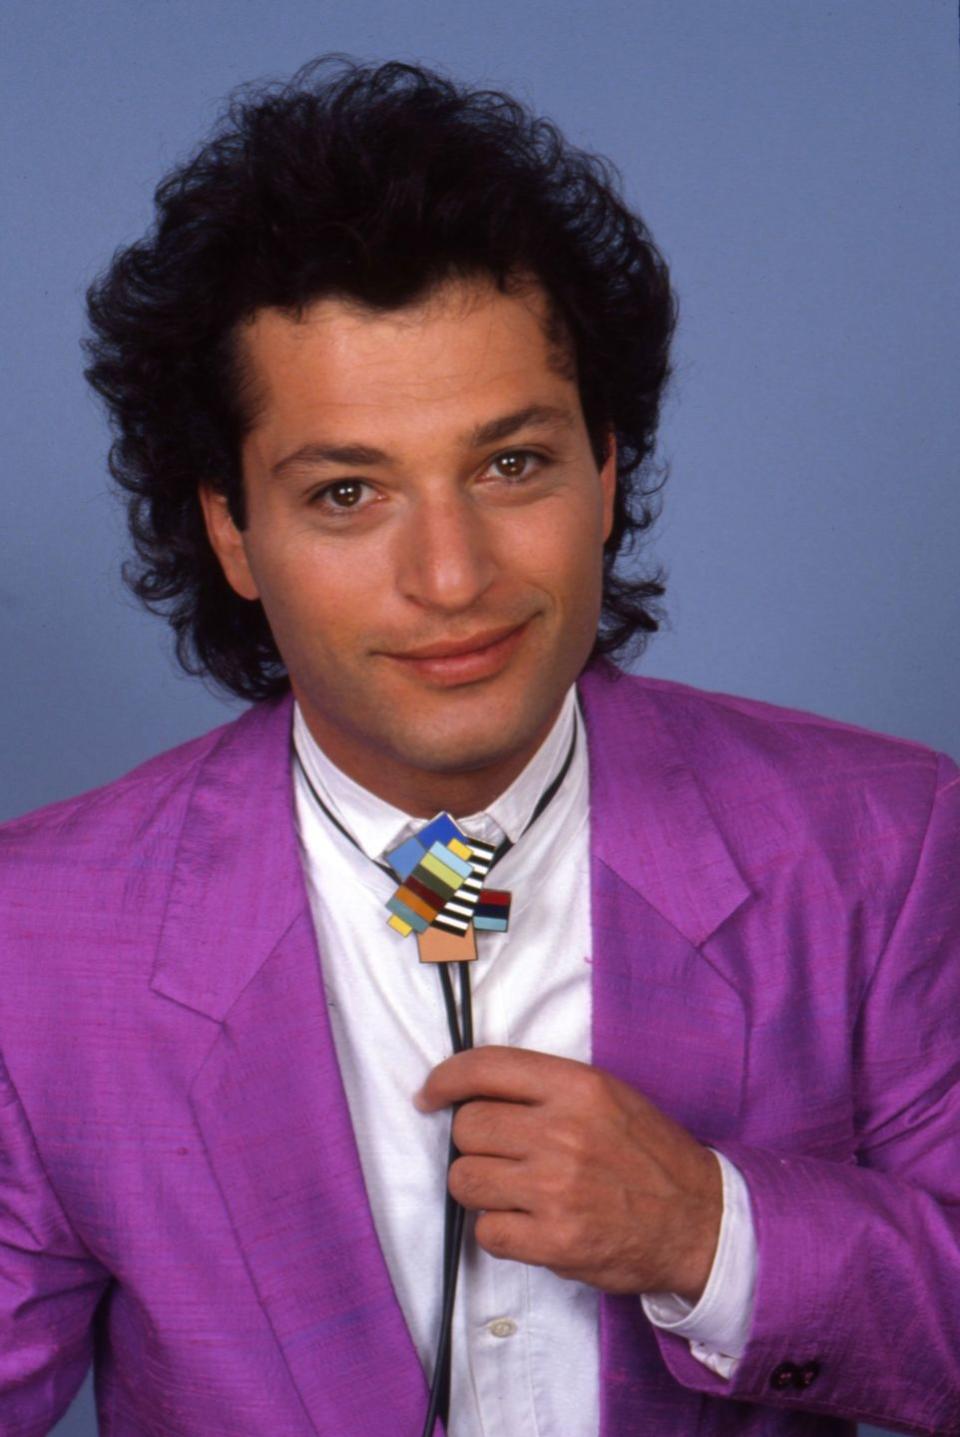 <p>It was the '80s, man. Not many had yet embraced the bald life, and the mullet was still trending—as proven by the comedian's style of choice.</p>